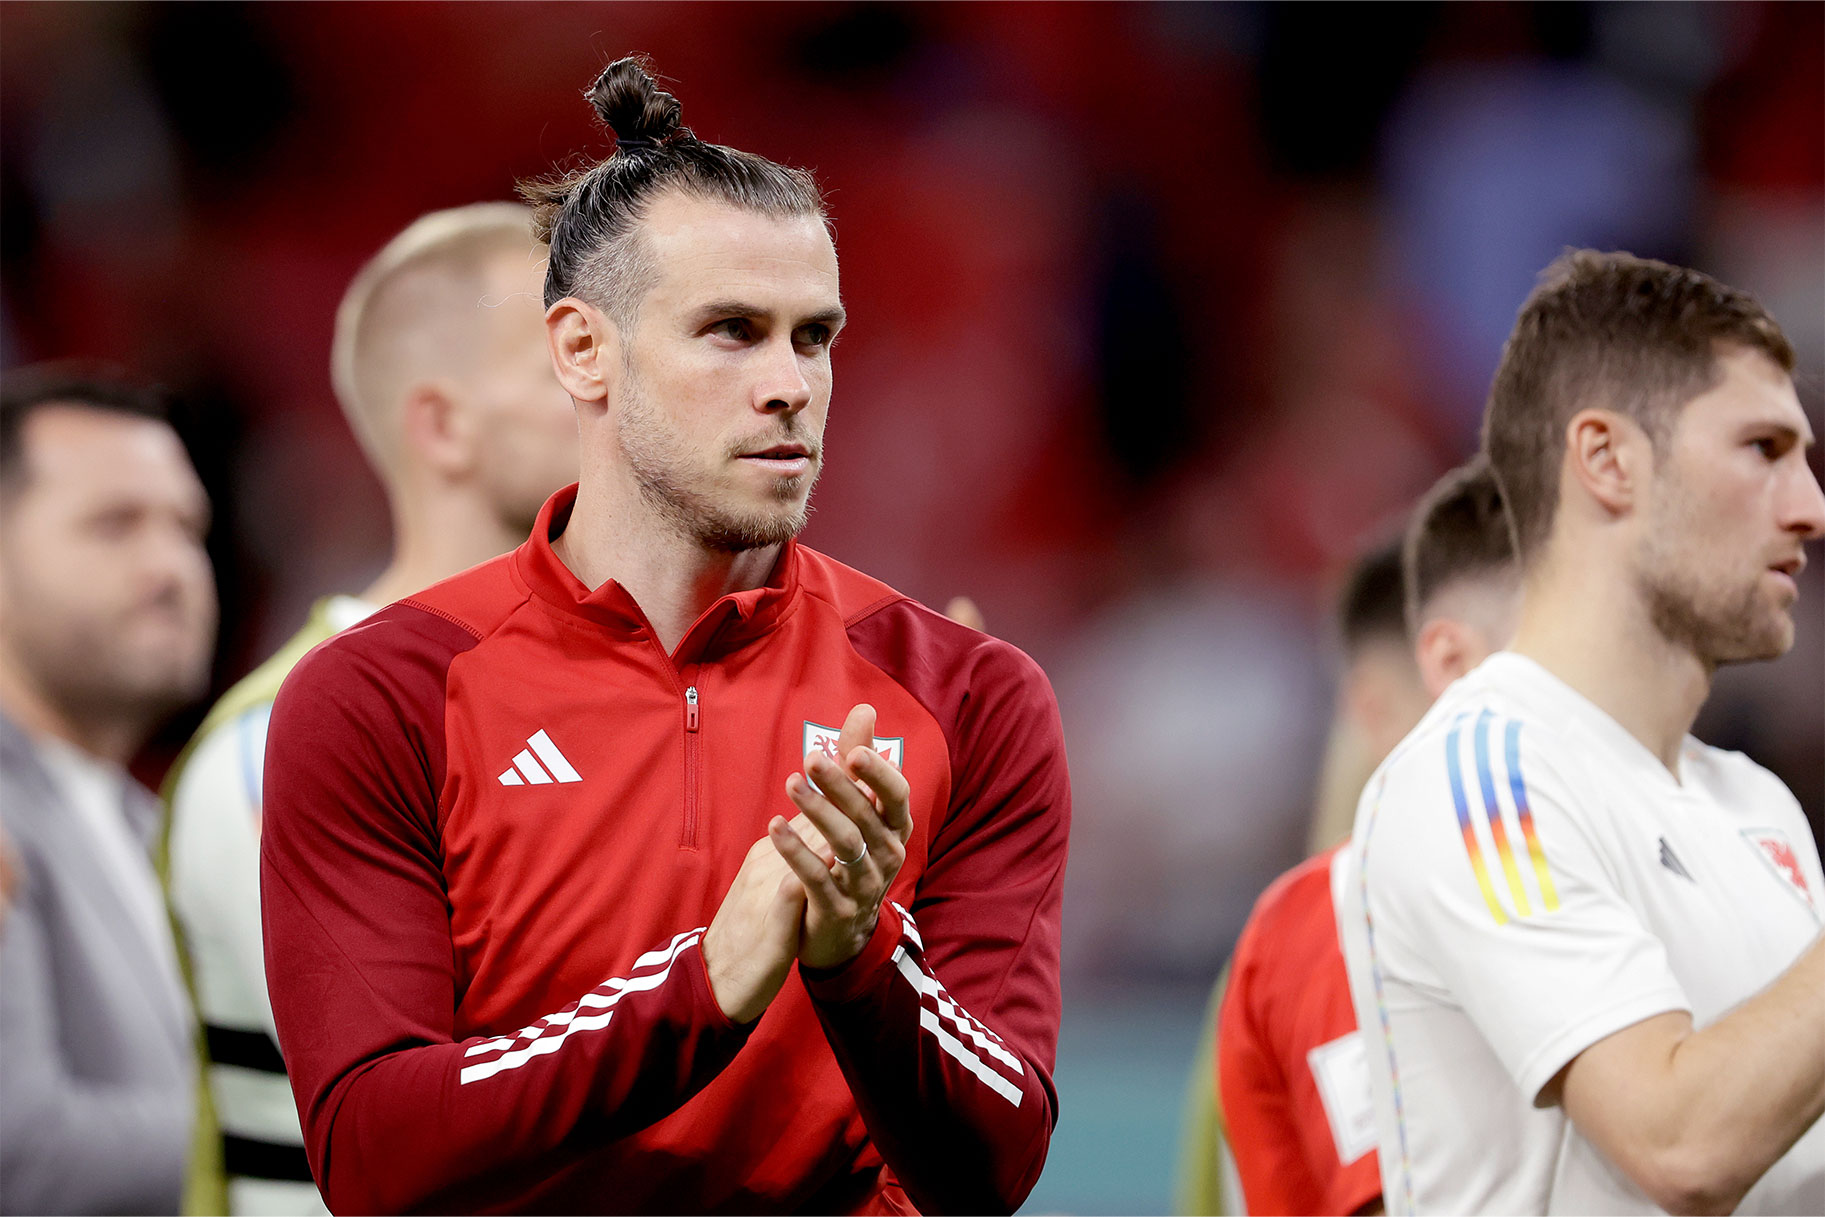 Gareth Bale of Wales disappointed during the  World Cup match between Wales  v England